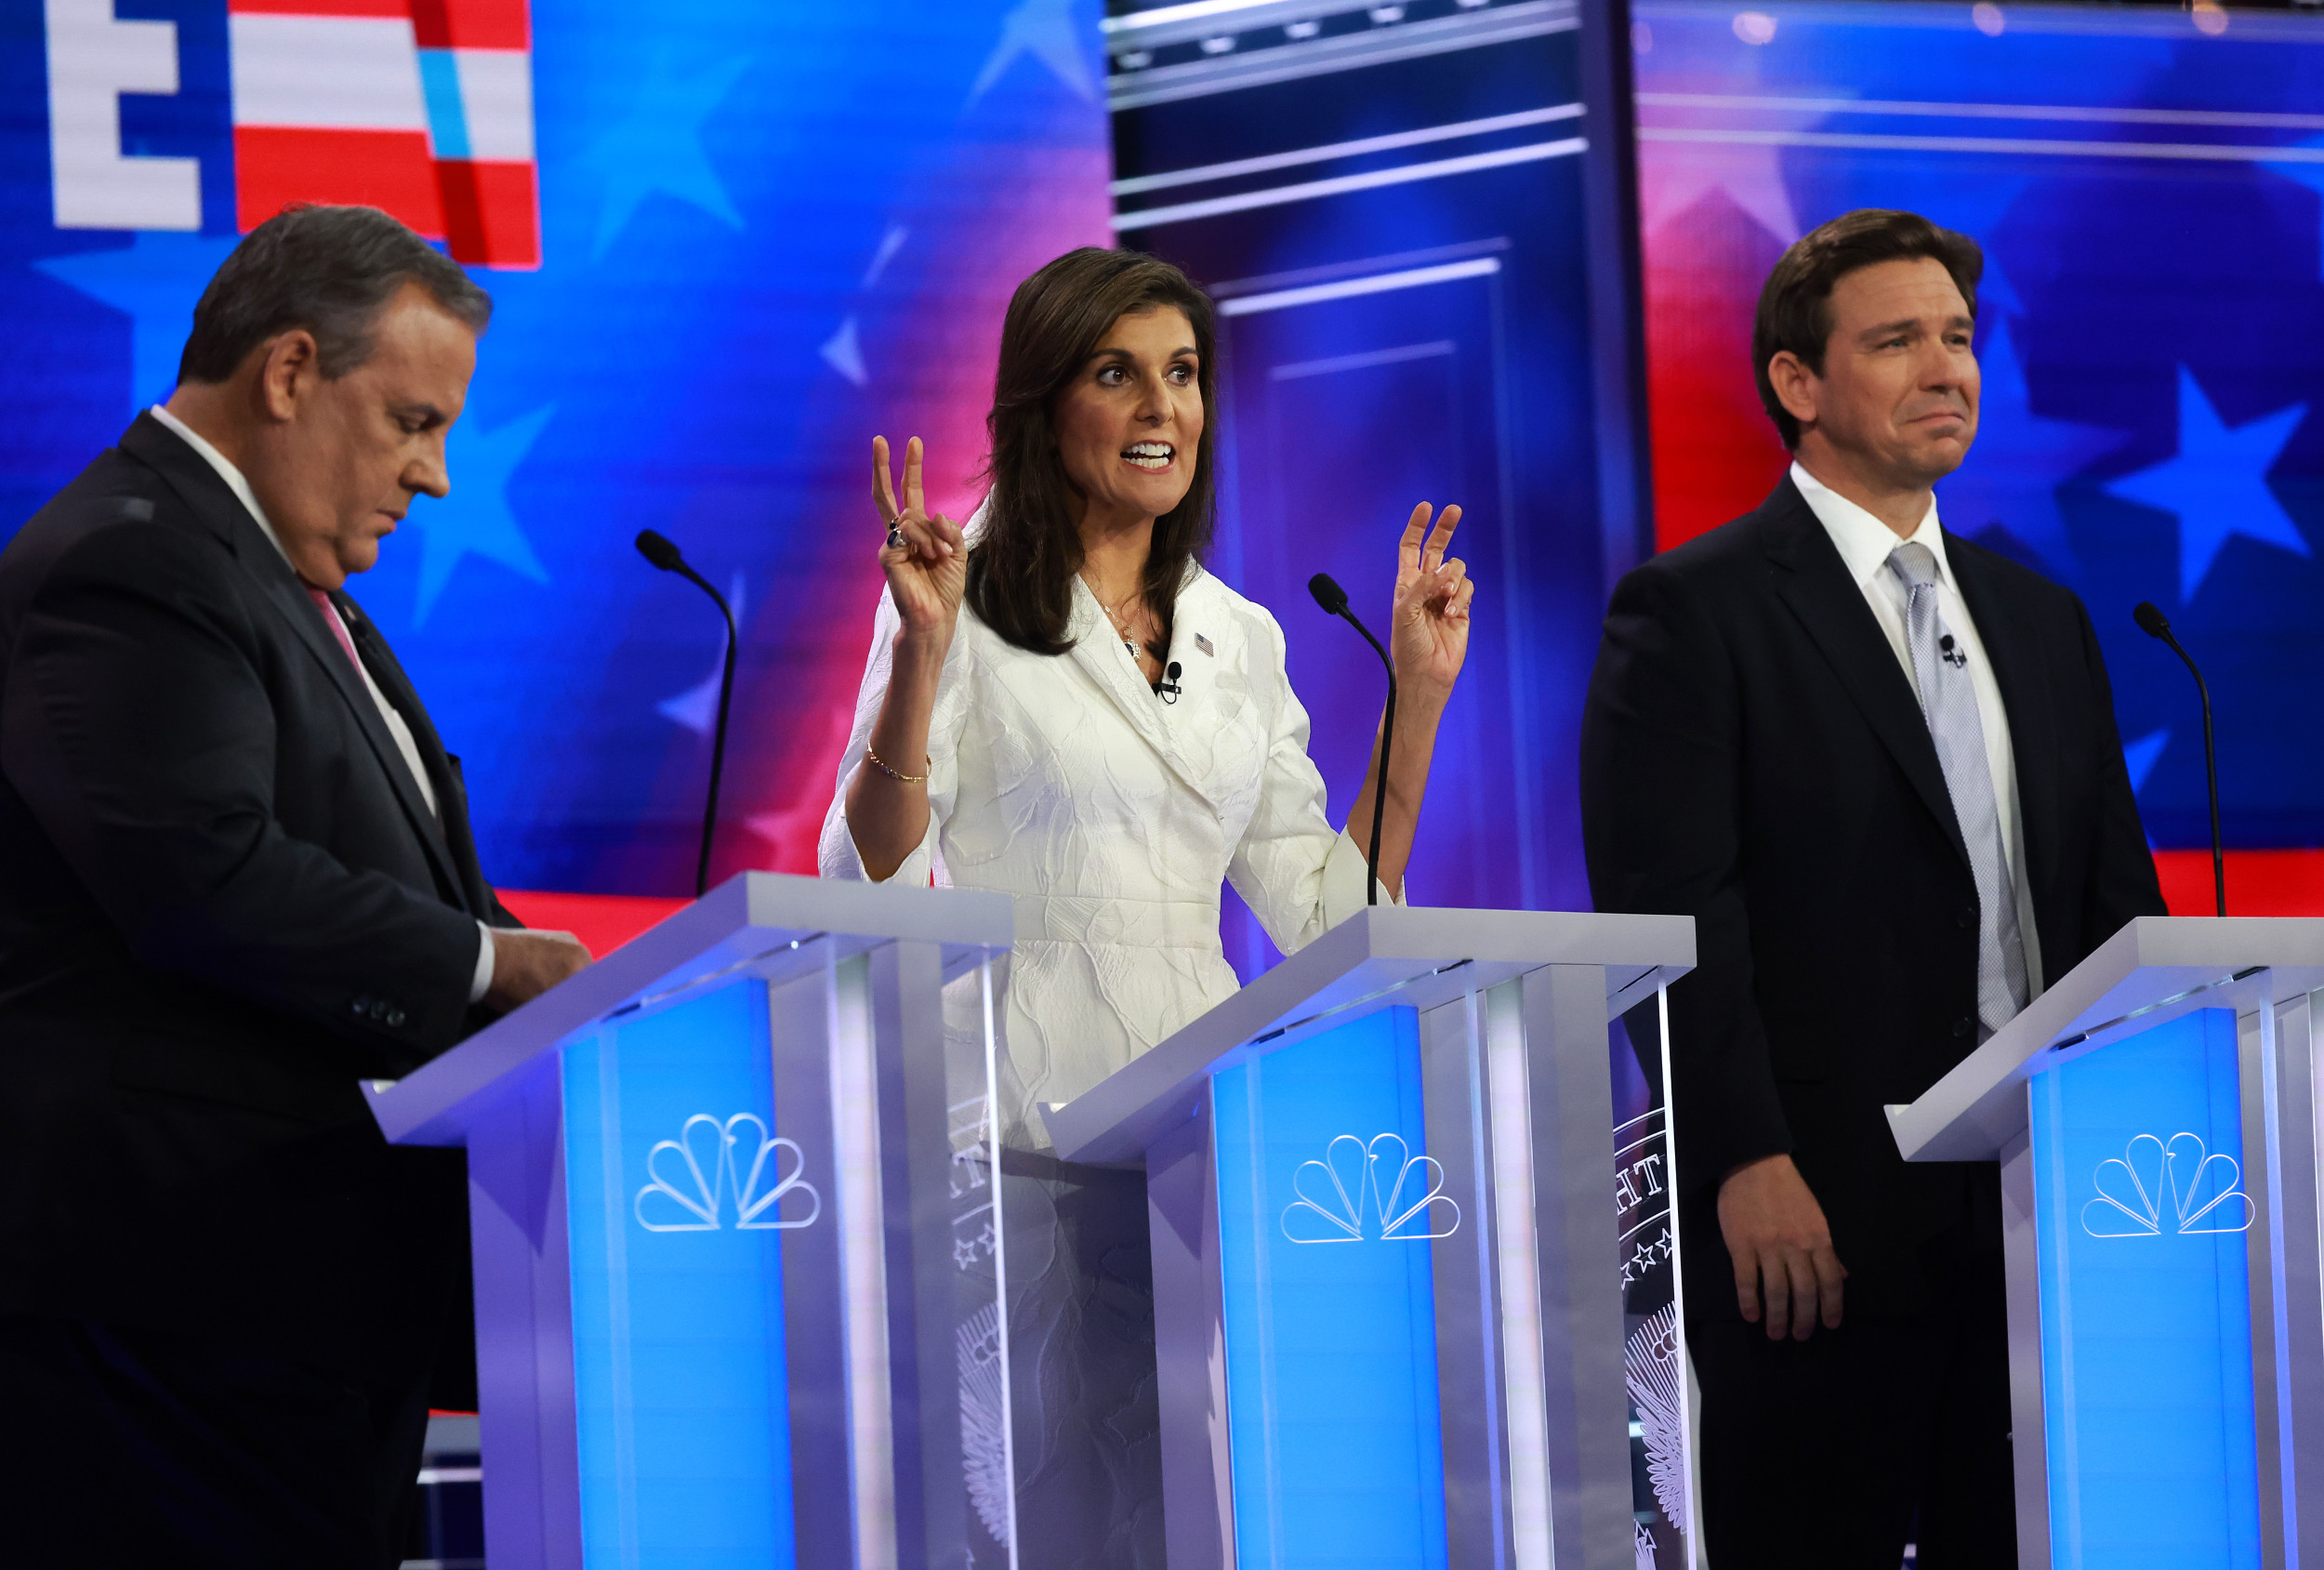 What Republicans Said About Cutting Social Security During Debate thumbnail